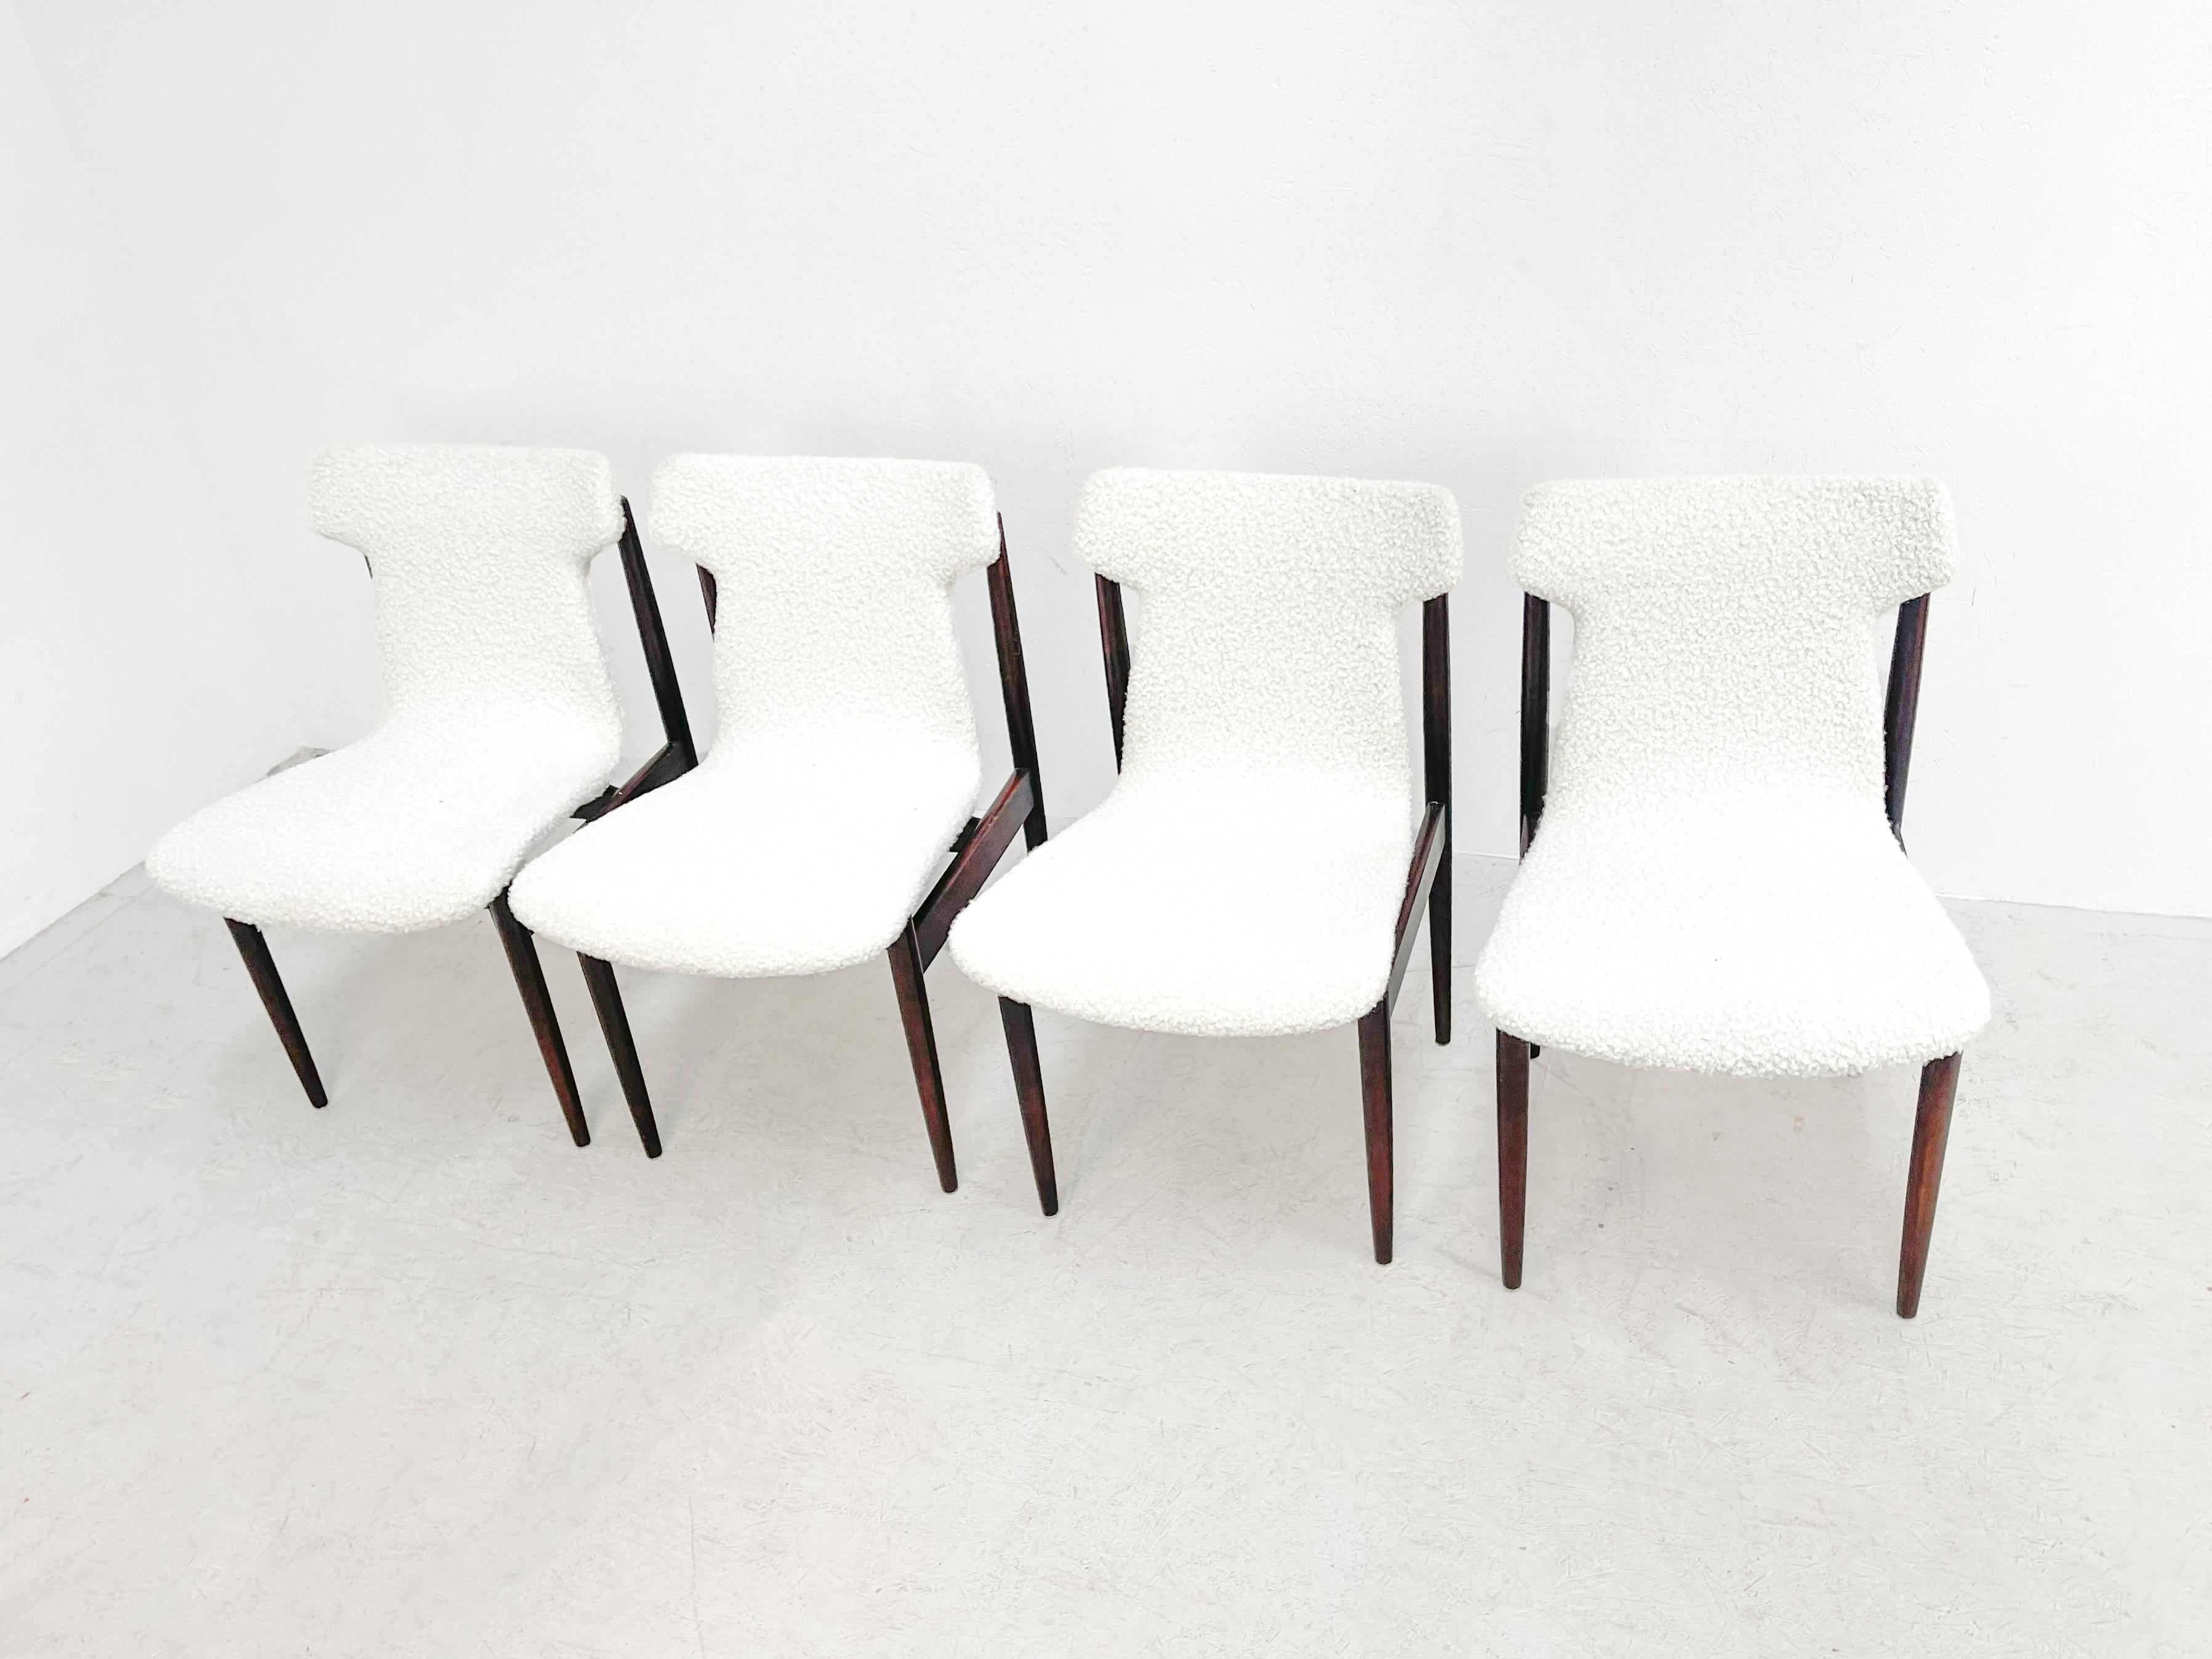 Set of four IK chairs by Inger Klingenberg.
Set of four IK dining chairs by danish designer Inger Klingenberg and manufactured by Fristho Franeker, Holland 1960.

The cushions have been reupholstred in a nice white boucle. The rosewood frame is